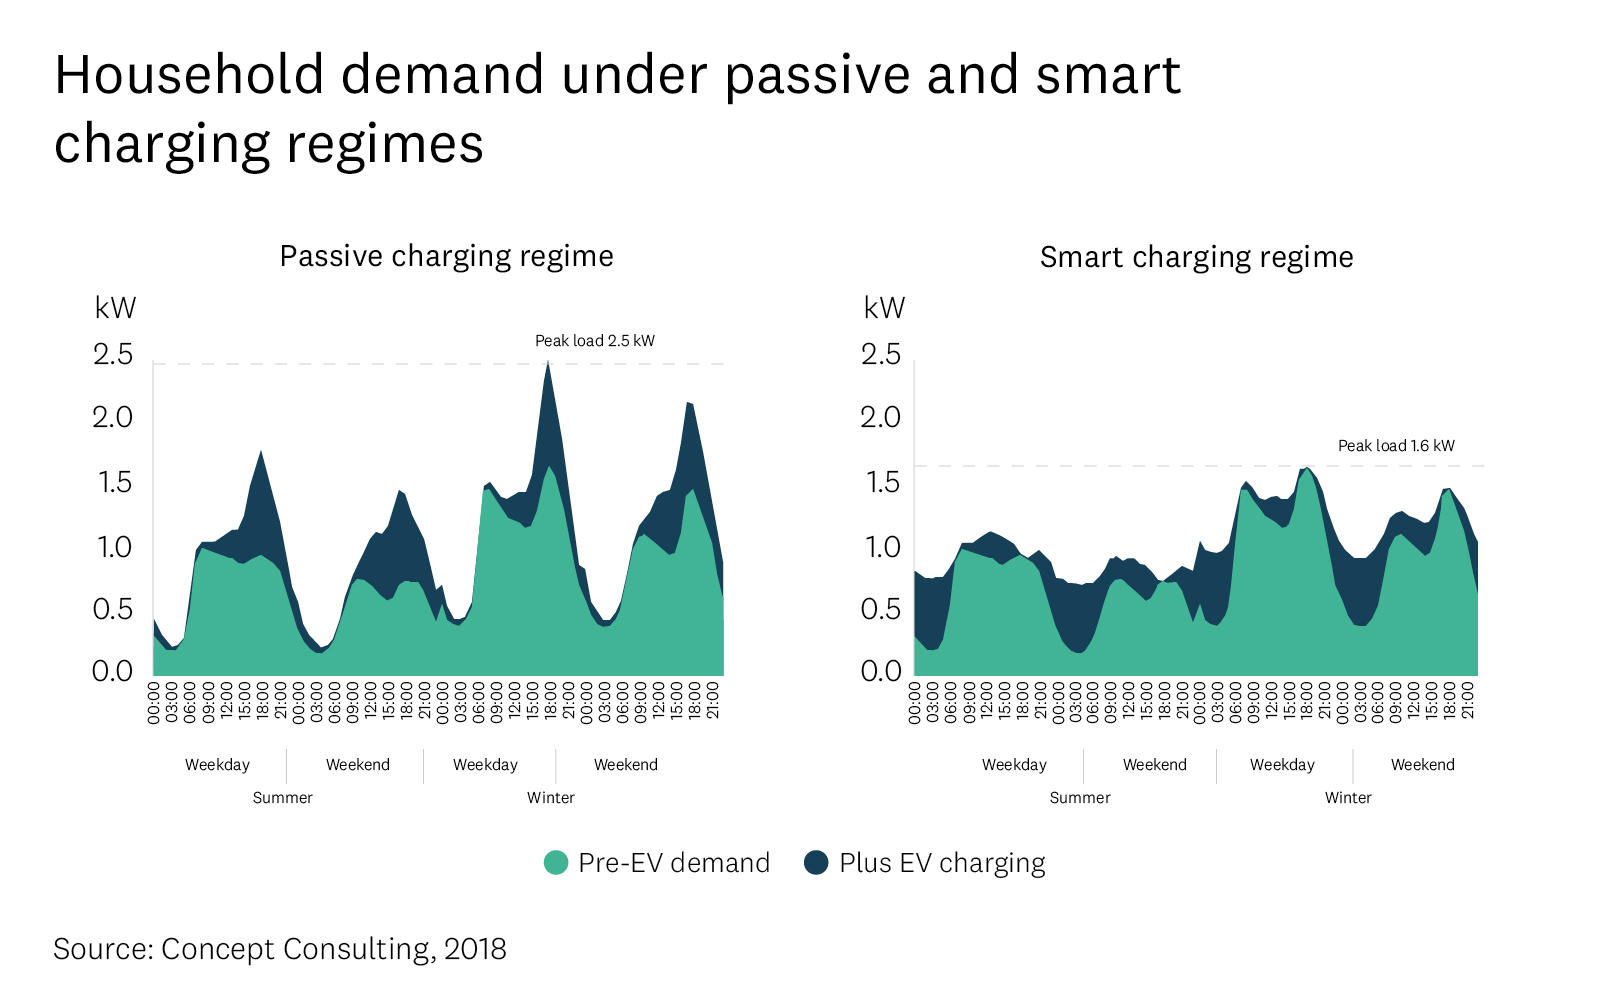 Graph models how EV charging contributes to electricity demand peaks, with passive vs smart charging regimes. 